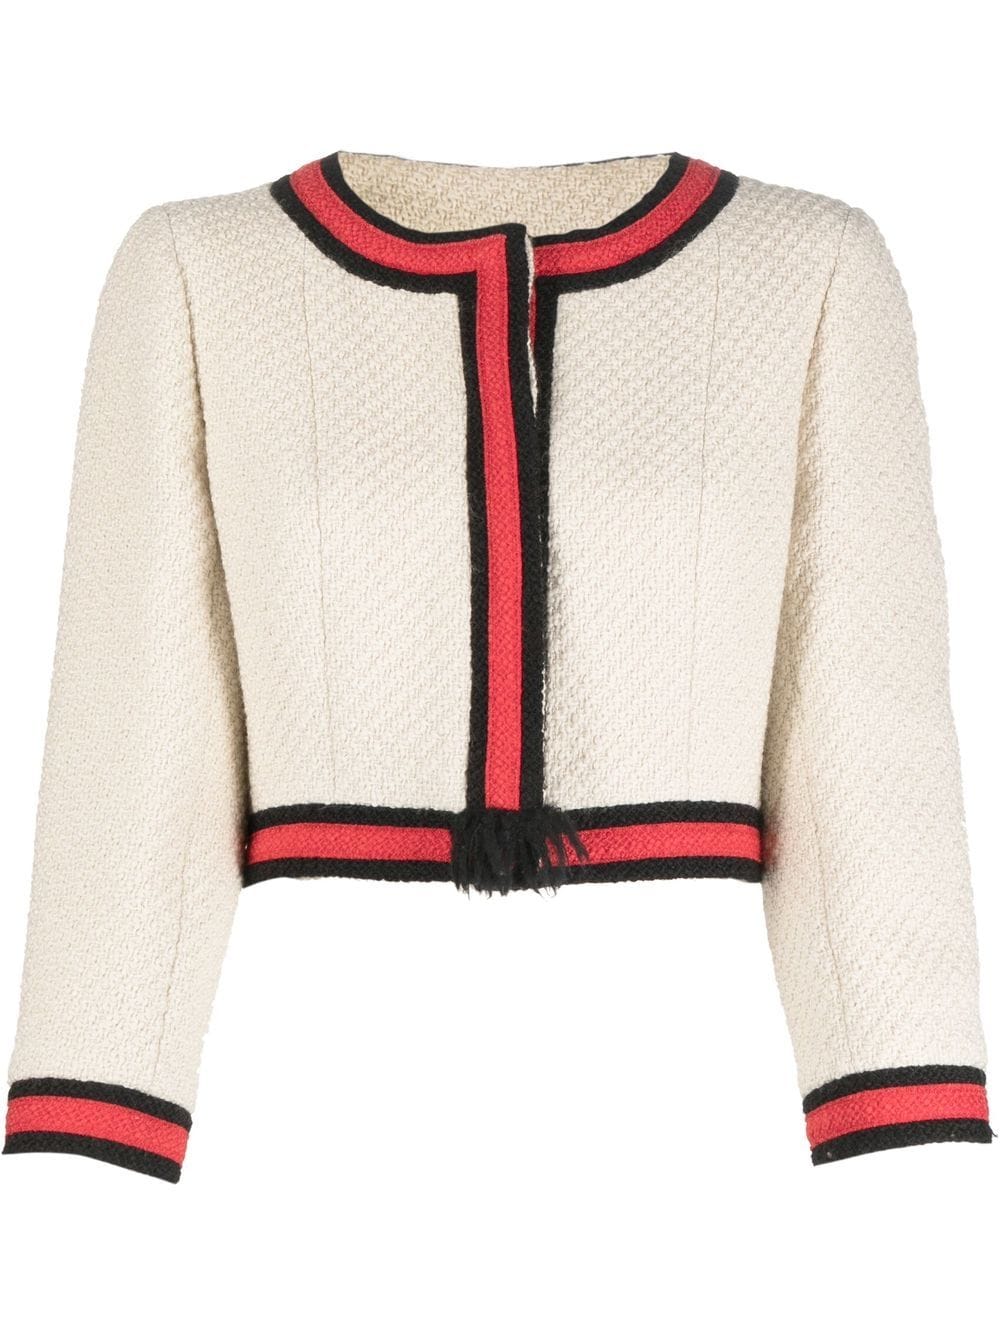 Chanel Jackets for women  Buy or Sell your Designer Clothing